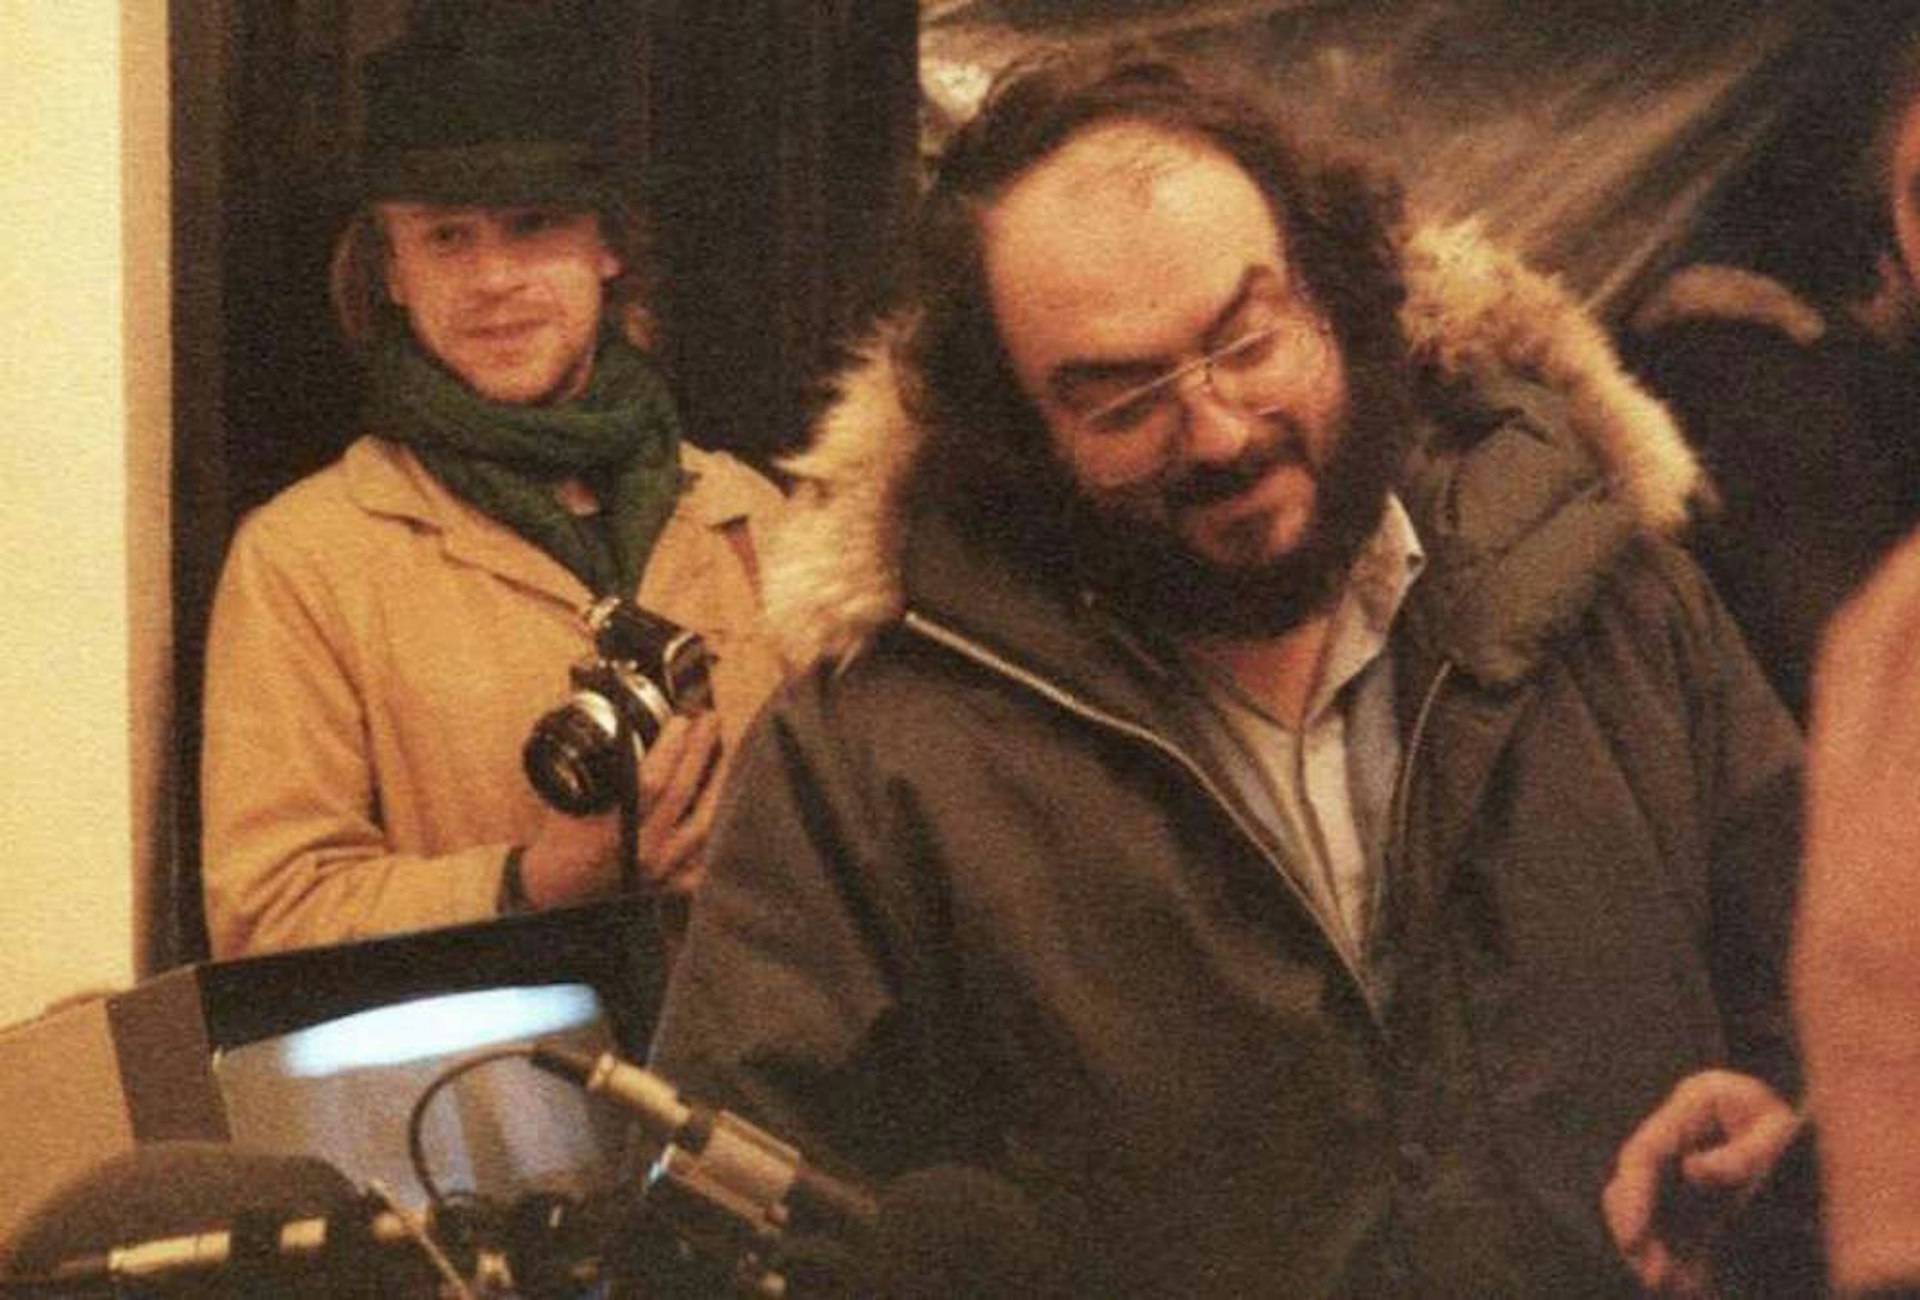 The story of Stanley Kubrick’s go-to problem-solver